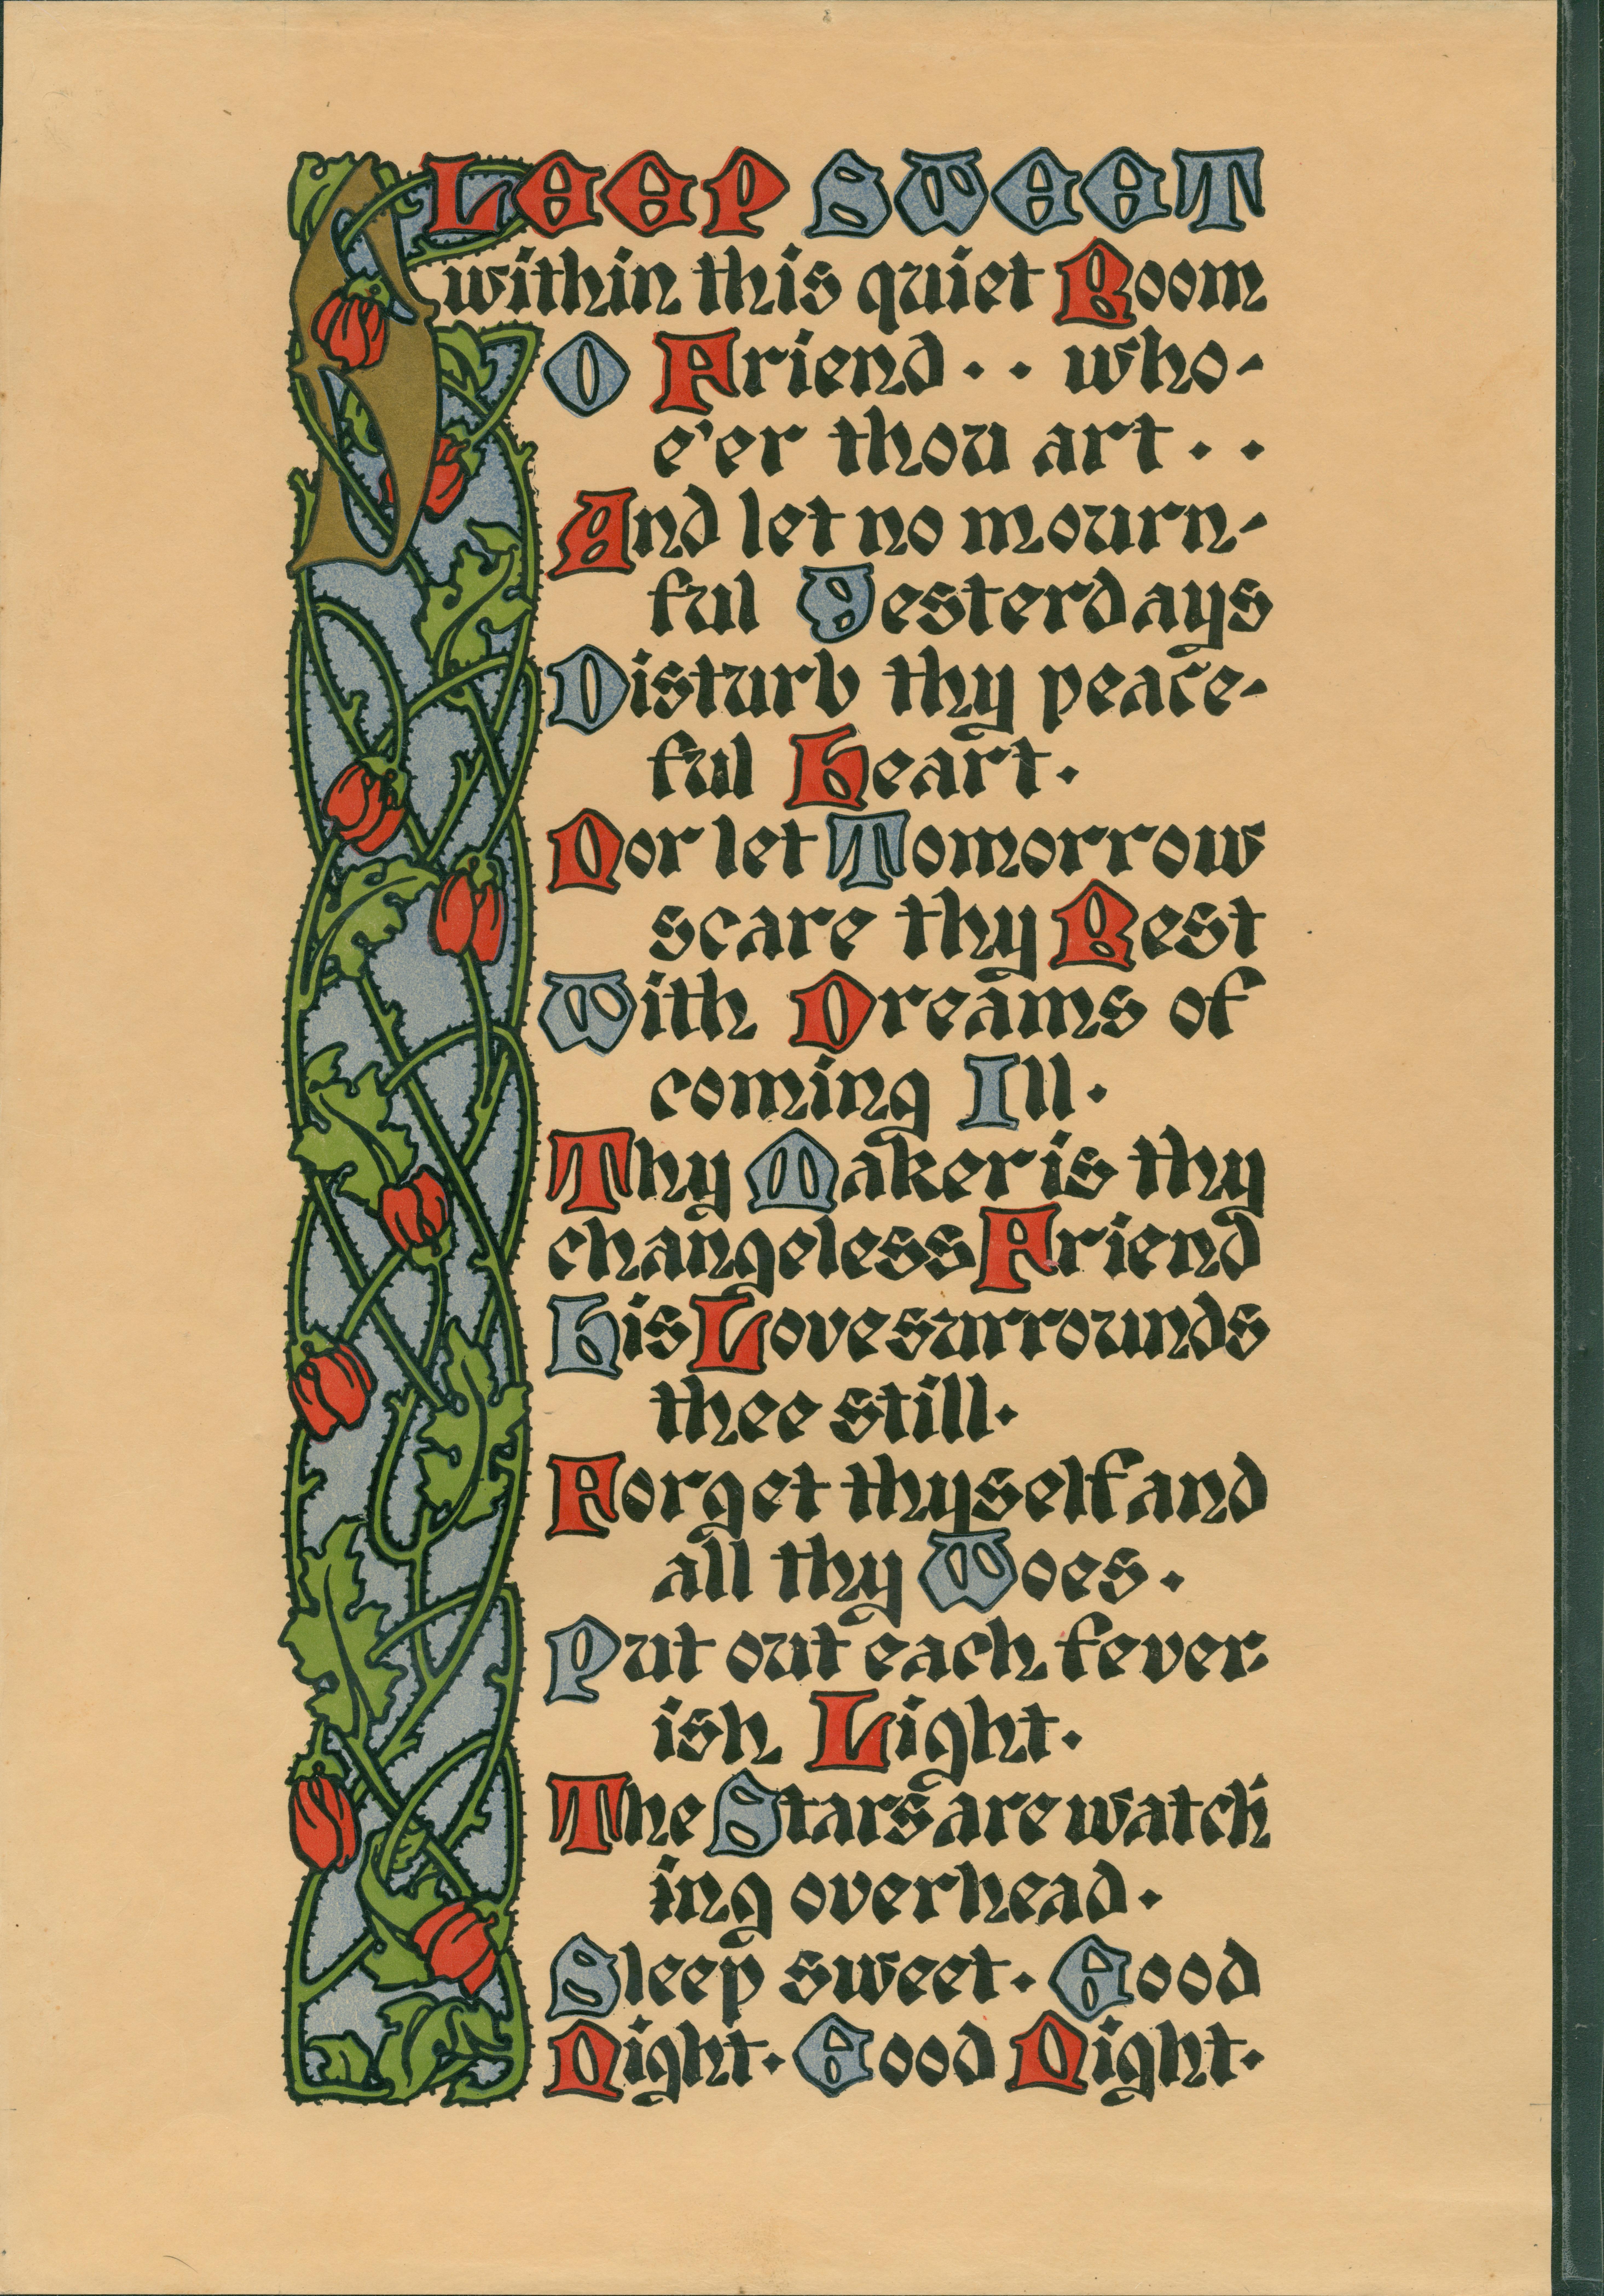 Inputter Note: This hand-colored poem shows a rose vine climbing up the left side of the page. Assorted letters in the poem are colored red and blue.